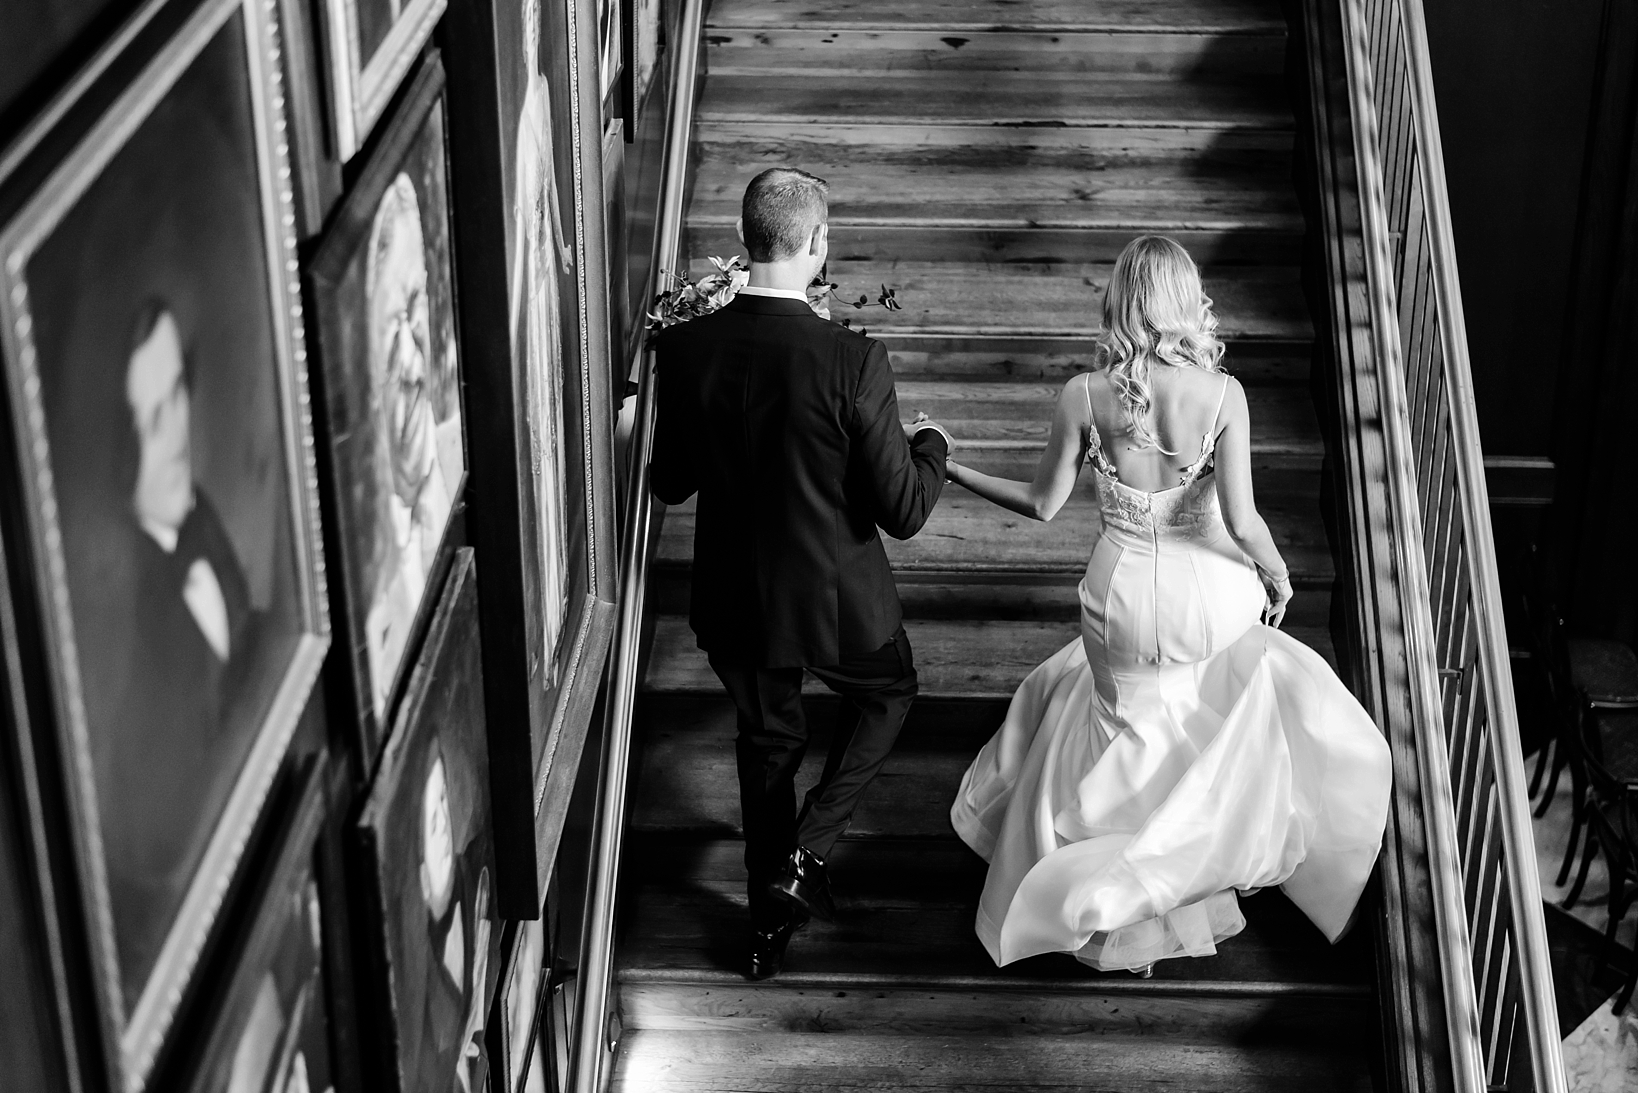 Bride and Groom ascending a staircase at their wedding venue in Tampa, FL